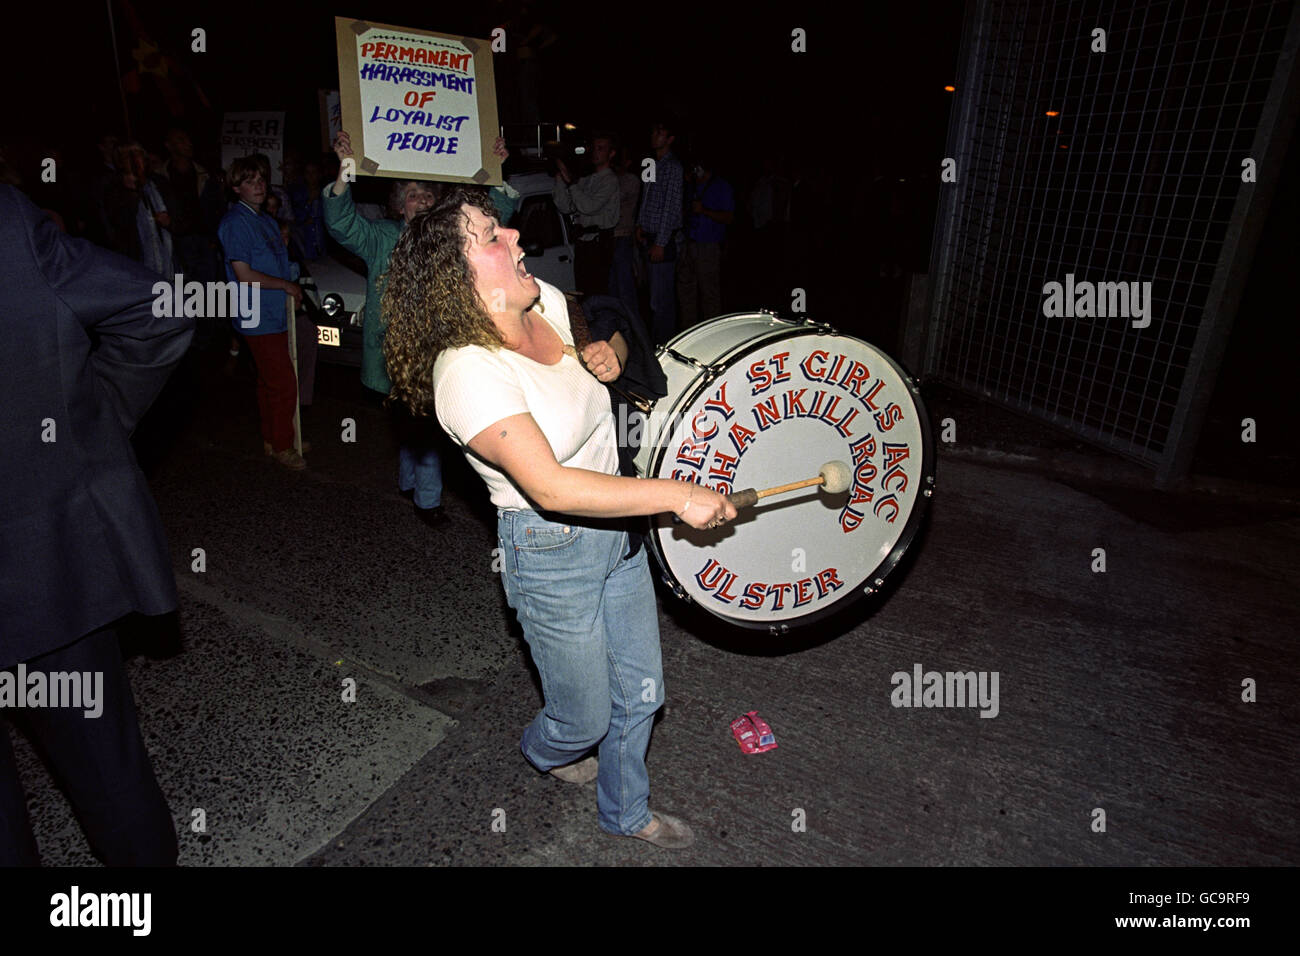 A LOYALIST DEMONSTRATOR PROTESTS ON THE SHANKILL ROAD IN BELFAST. Stock Photo